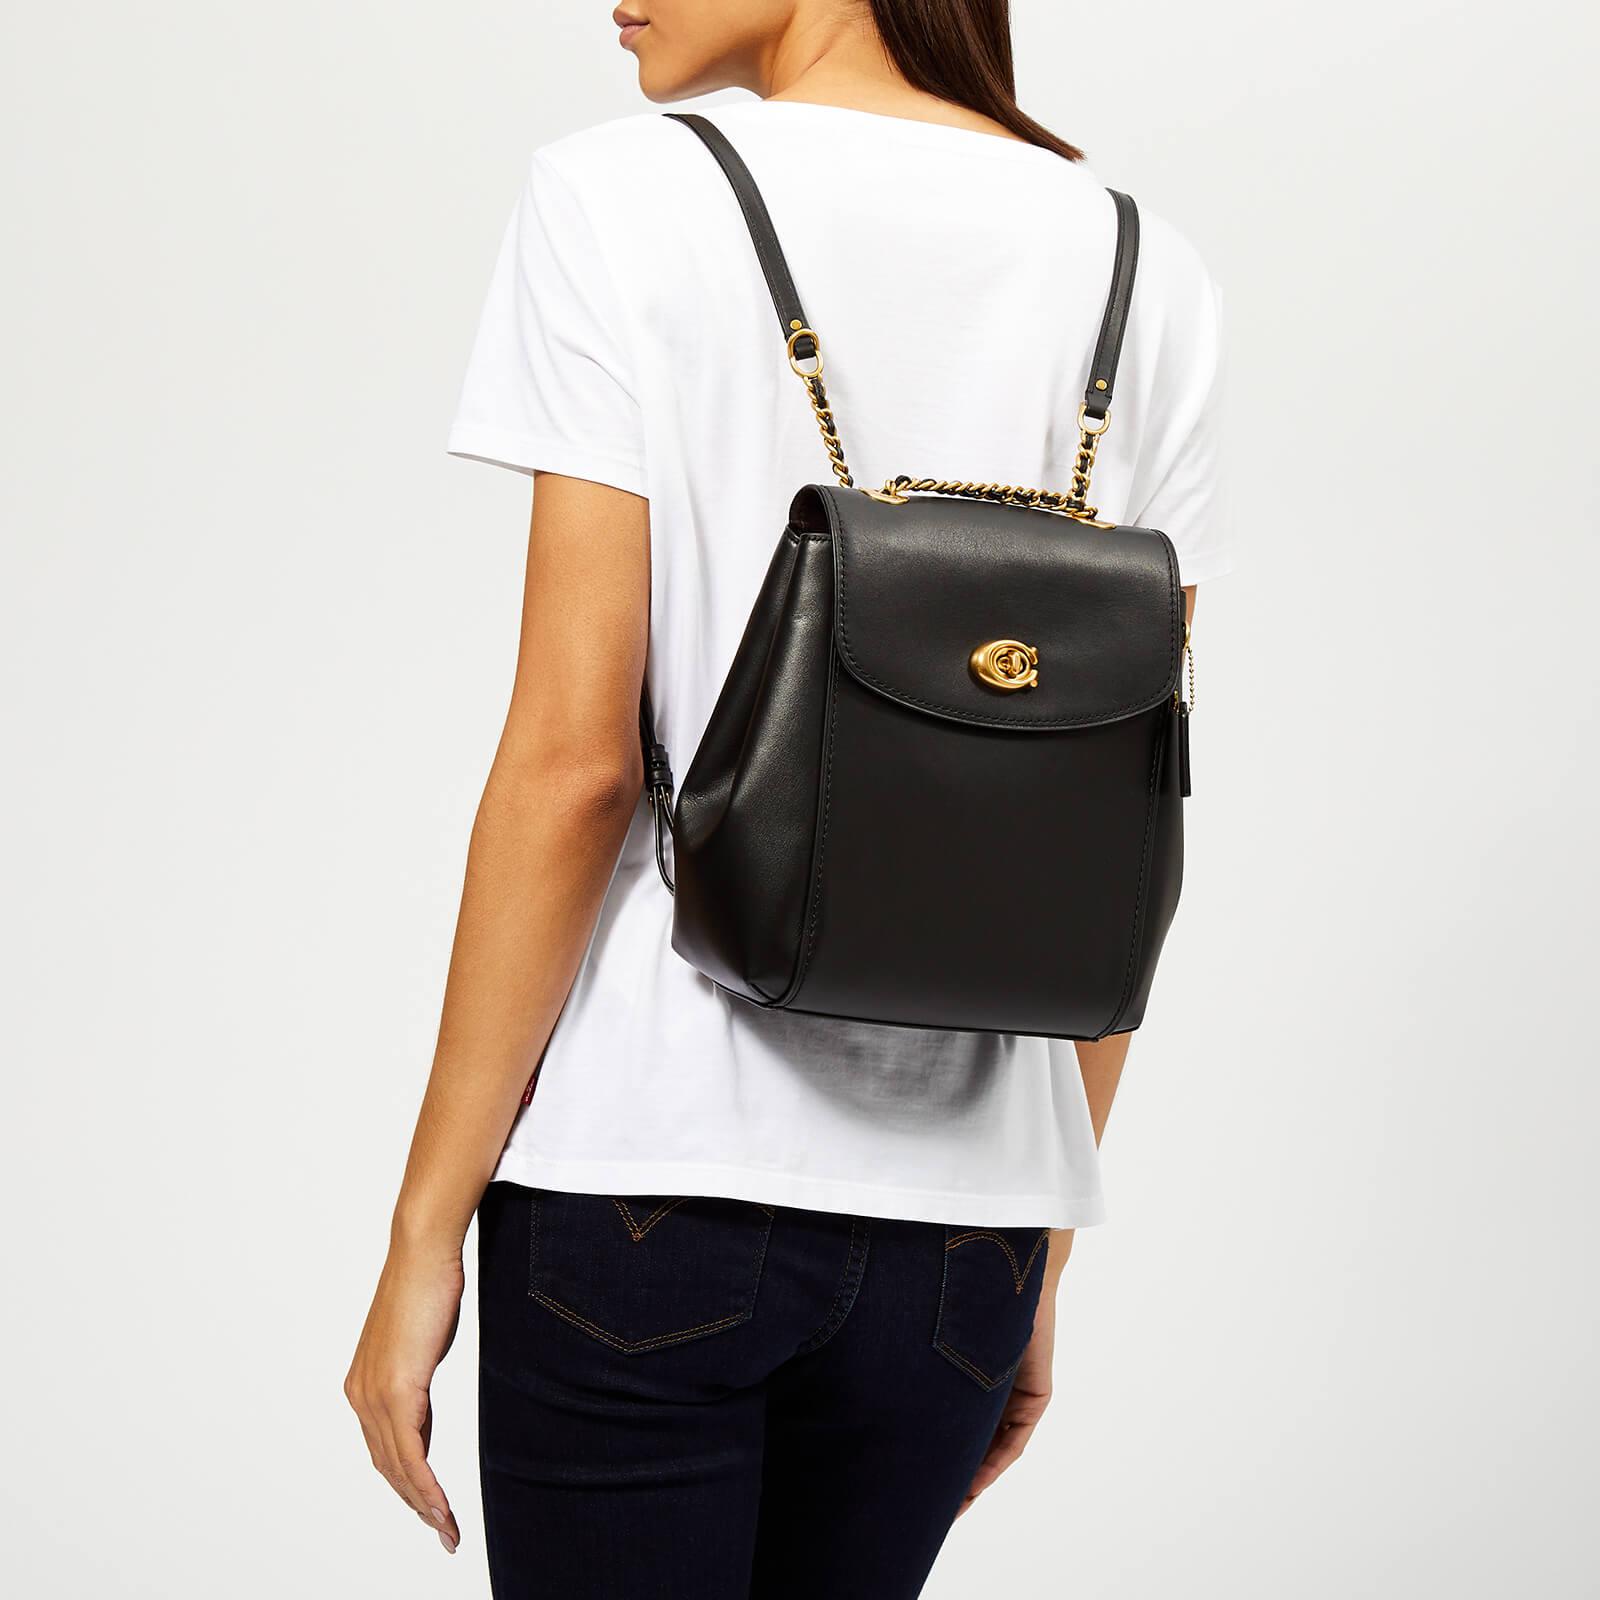 coachtotes > Purchase - 62%